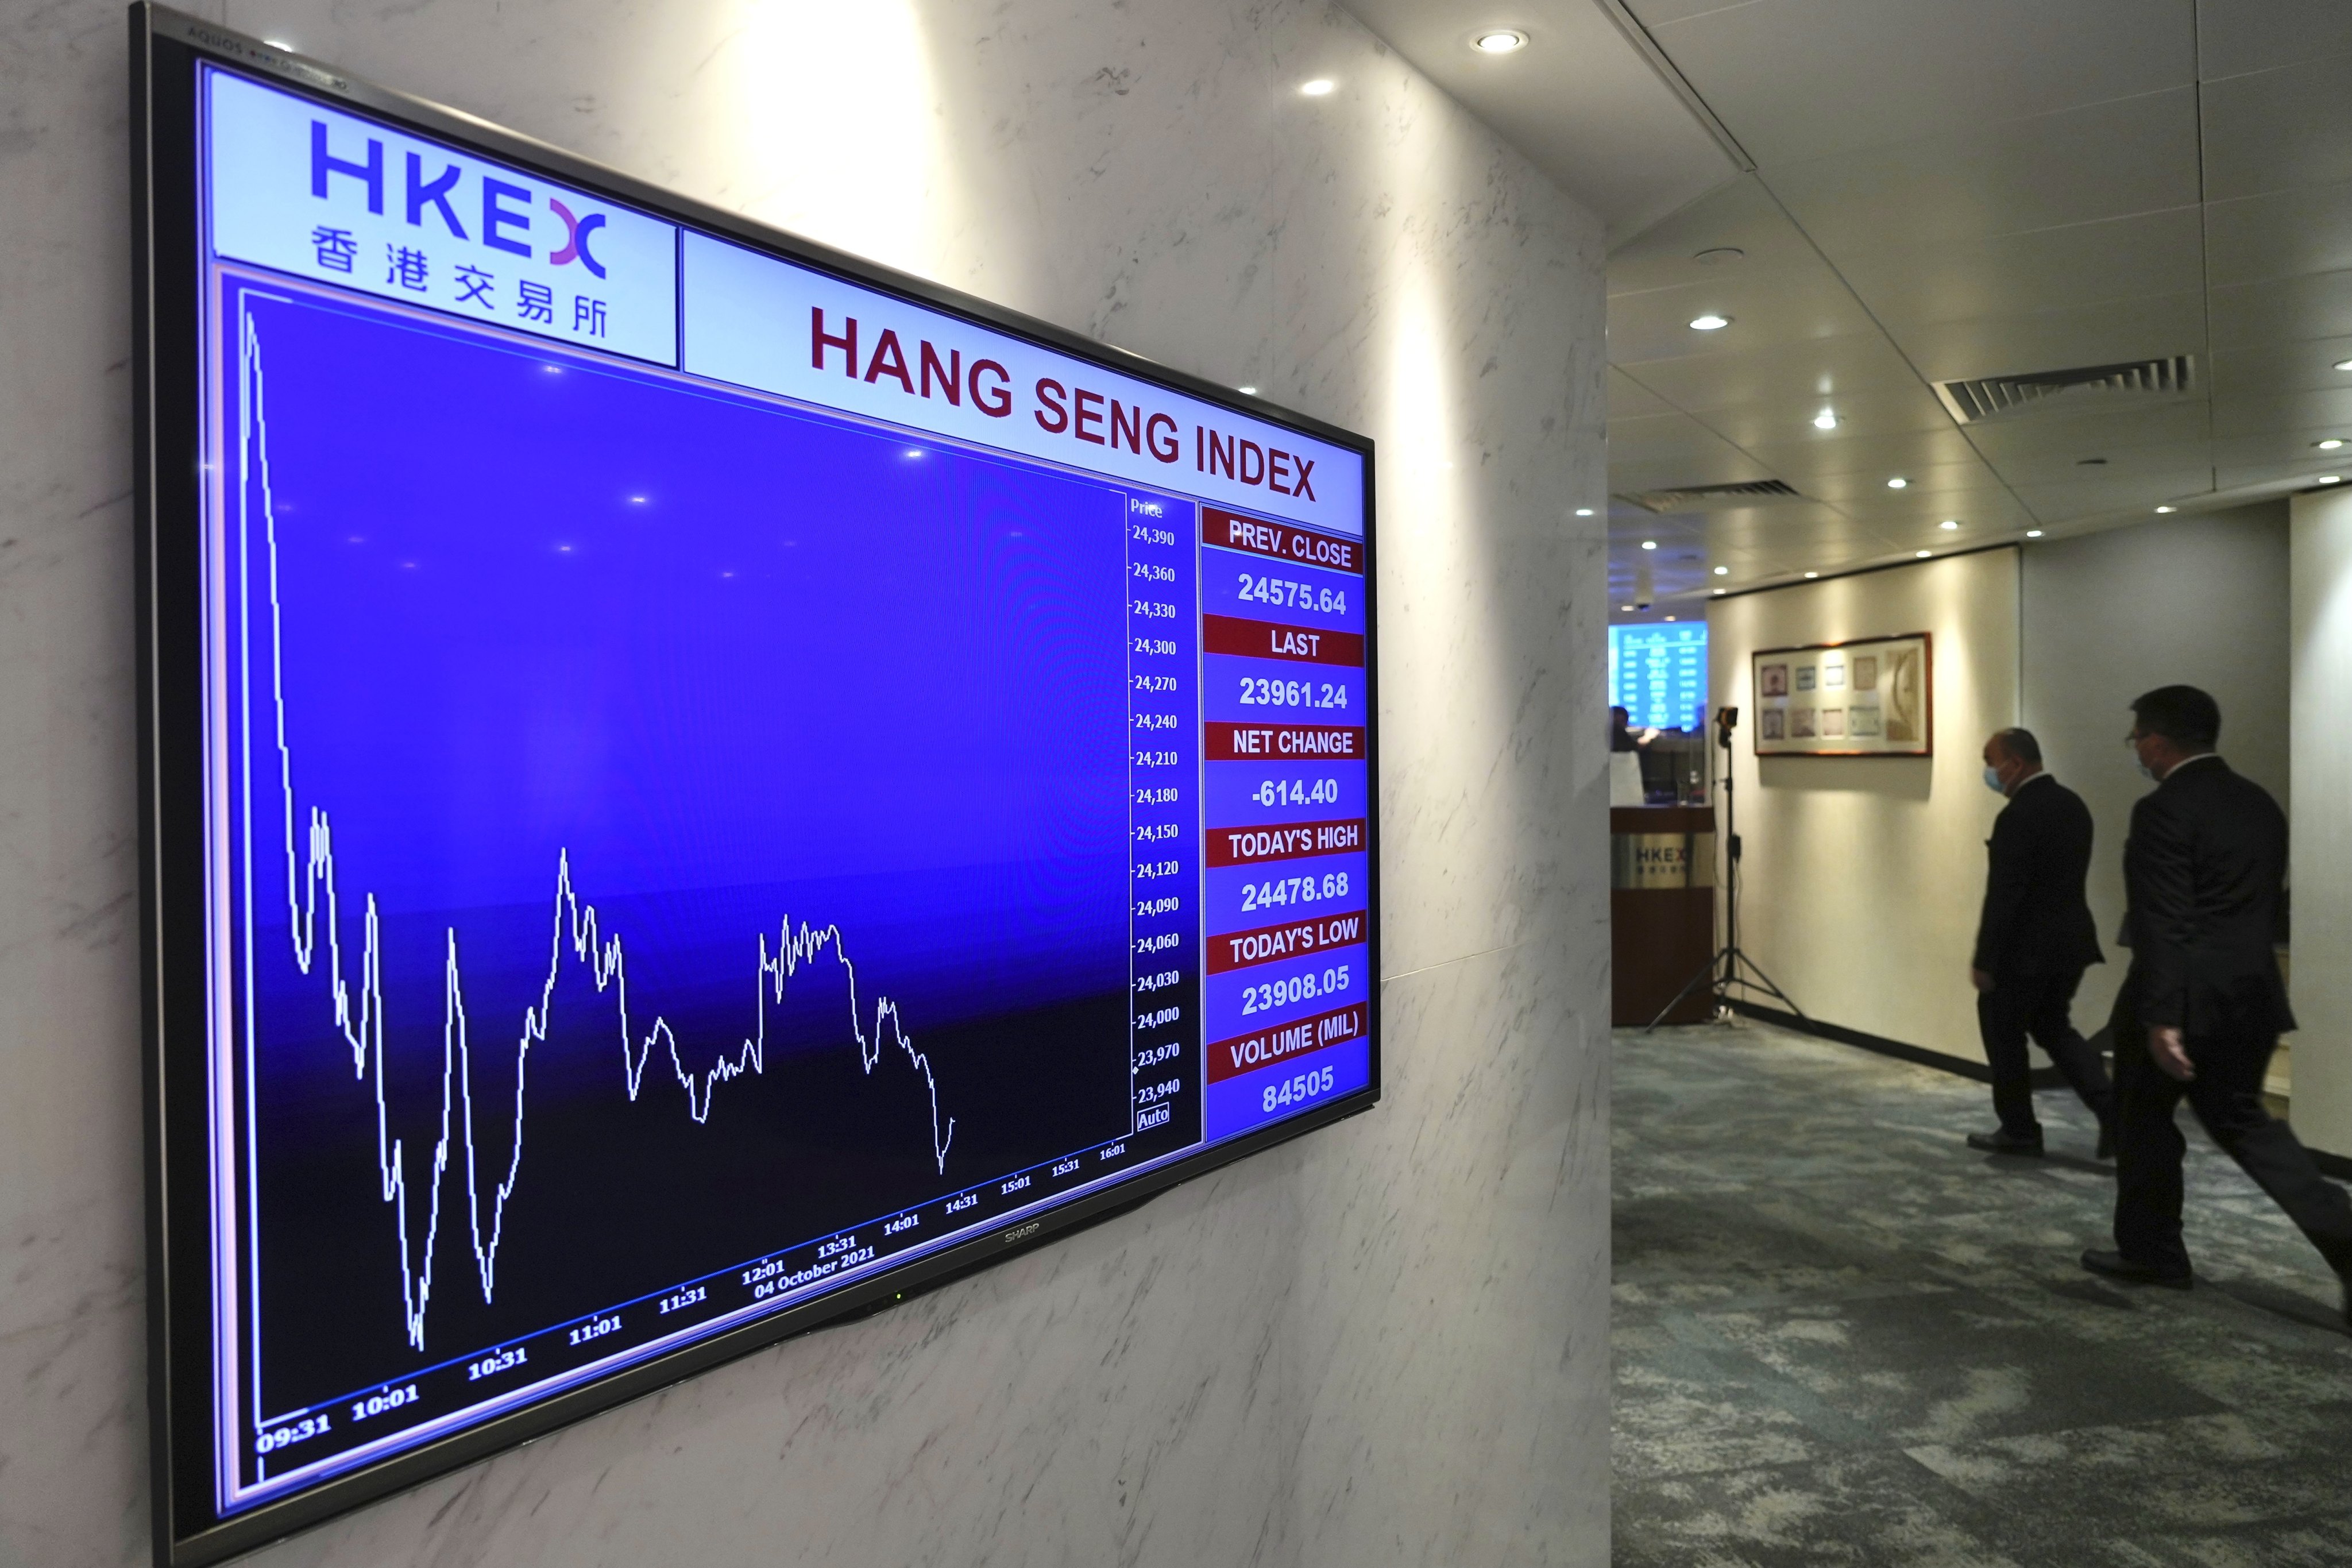 Dual currency stock trading includes mainly big names such as Tencent, Ping An Insurance and AIA. Photo: AP